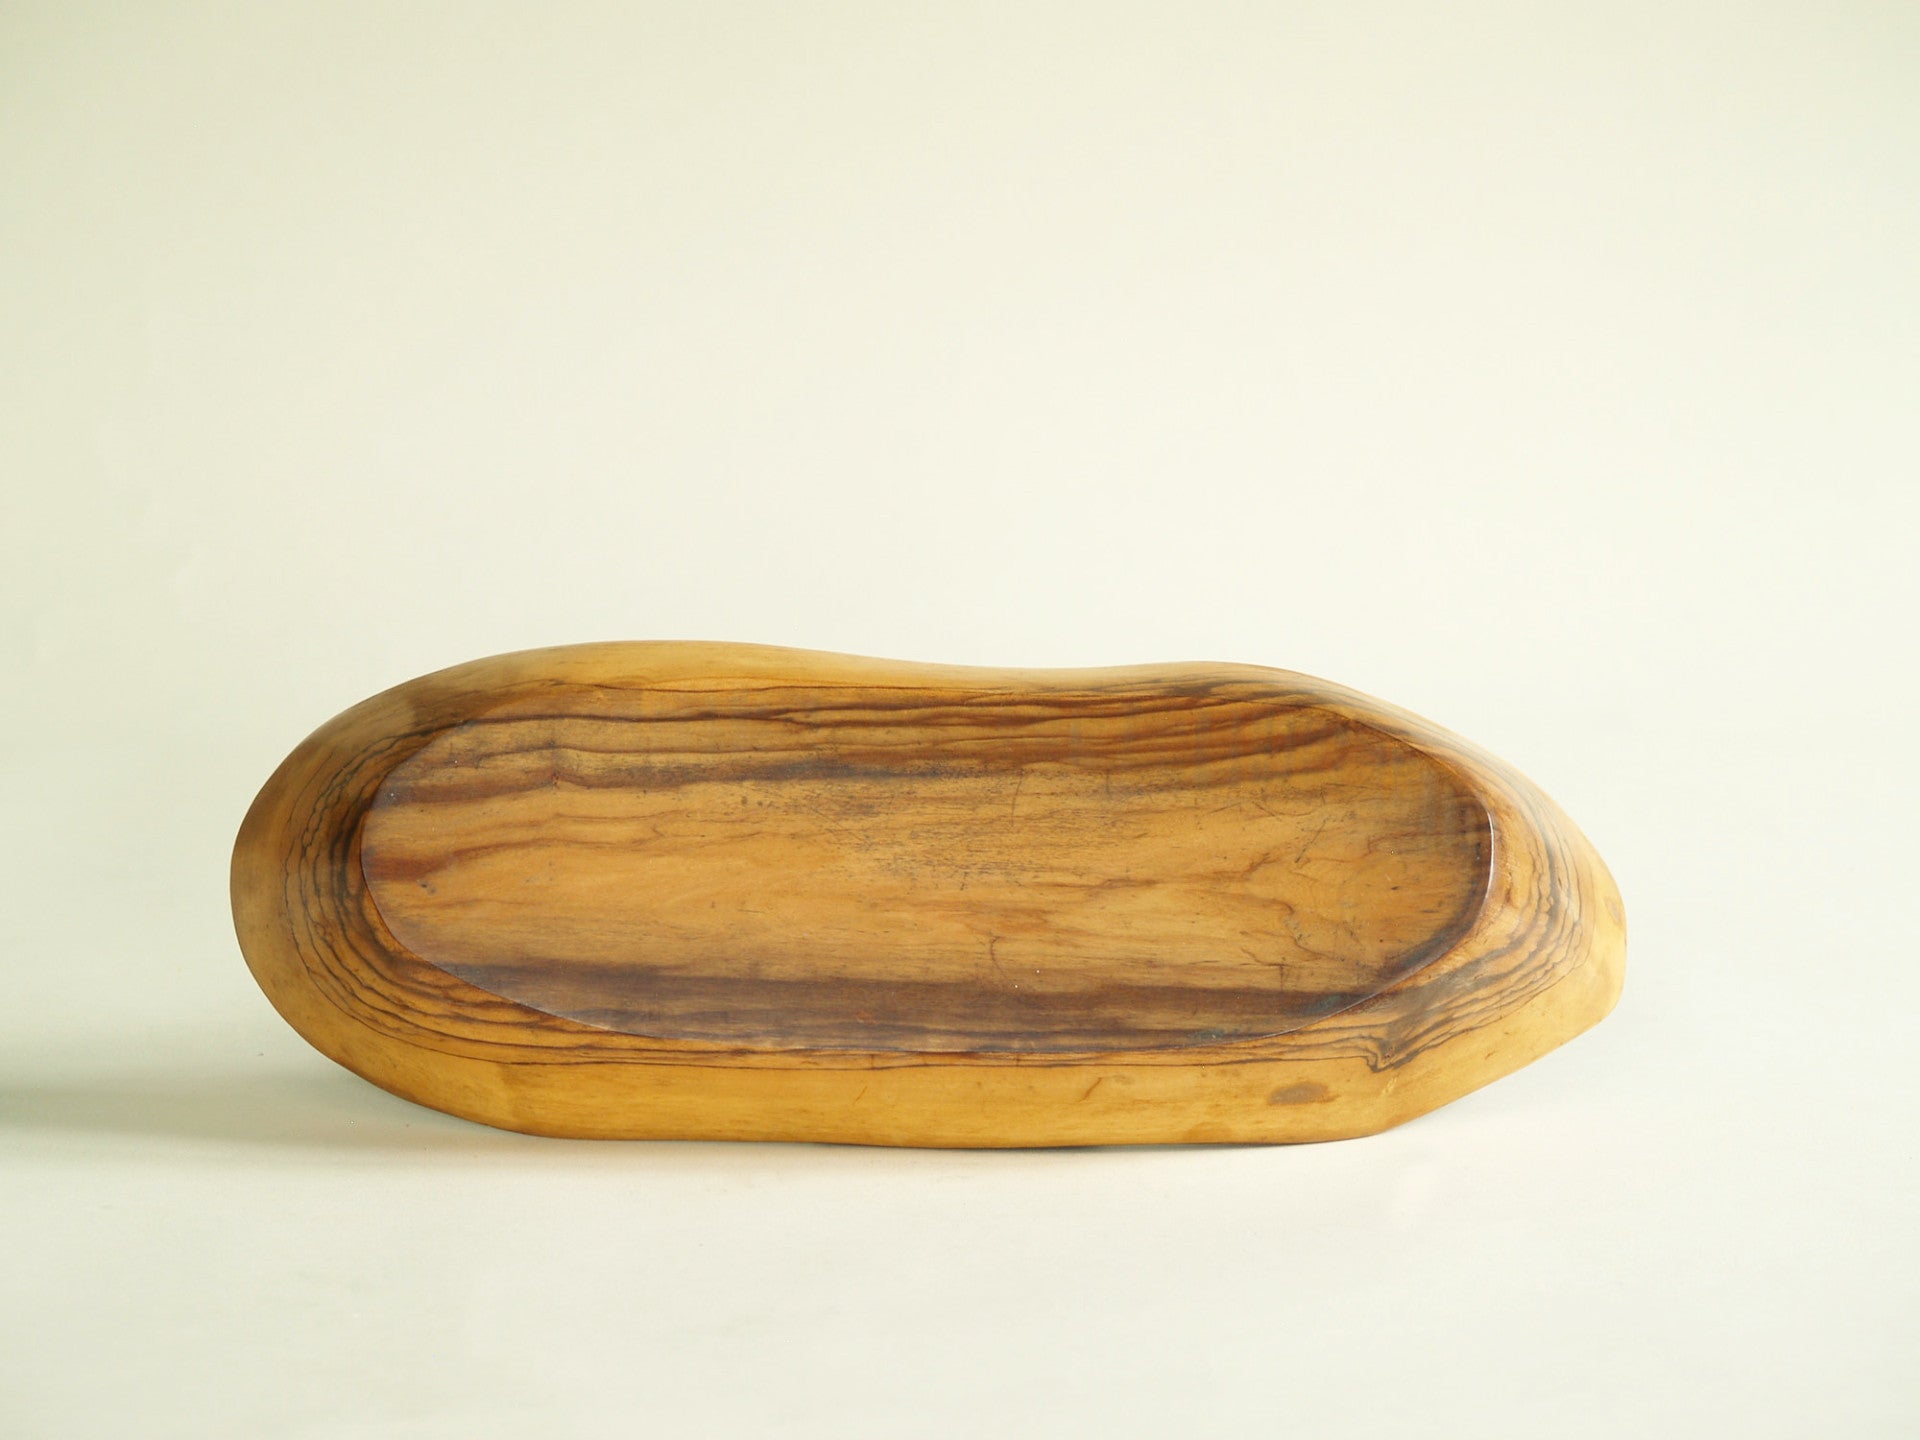 Coupe monoxyle de forme navette, France (vers 1950)..boat-shaped carved bowl, France (circa 1950)